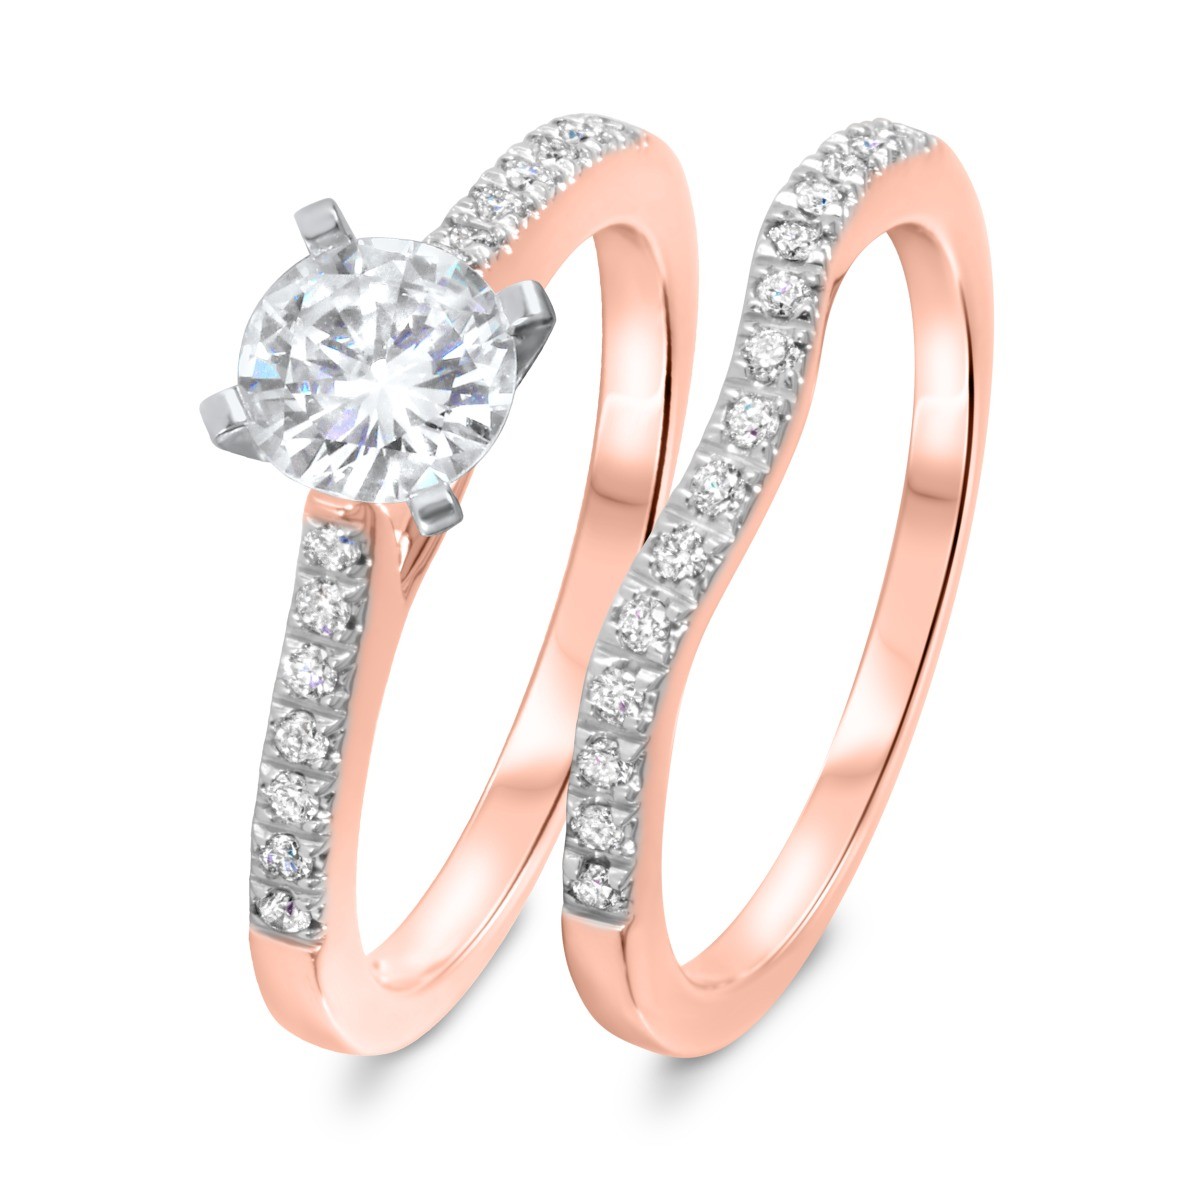 my trio rings 1 carat diamond and rose gold engagement ring and matching diamond ladies band